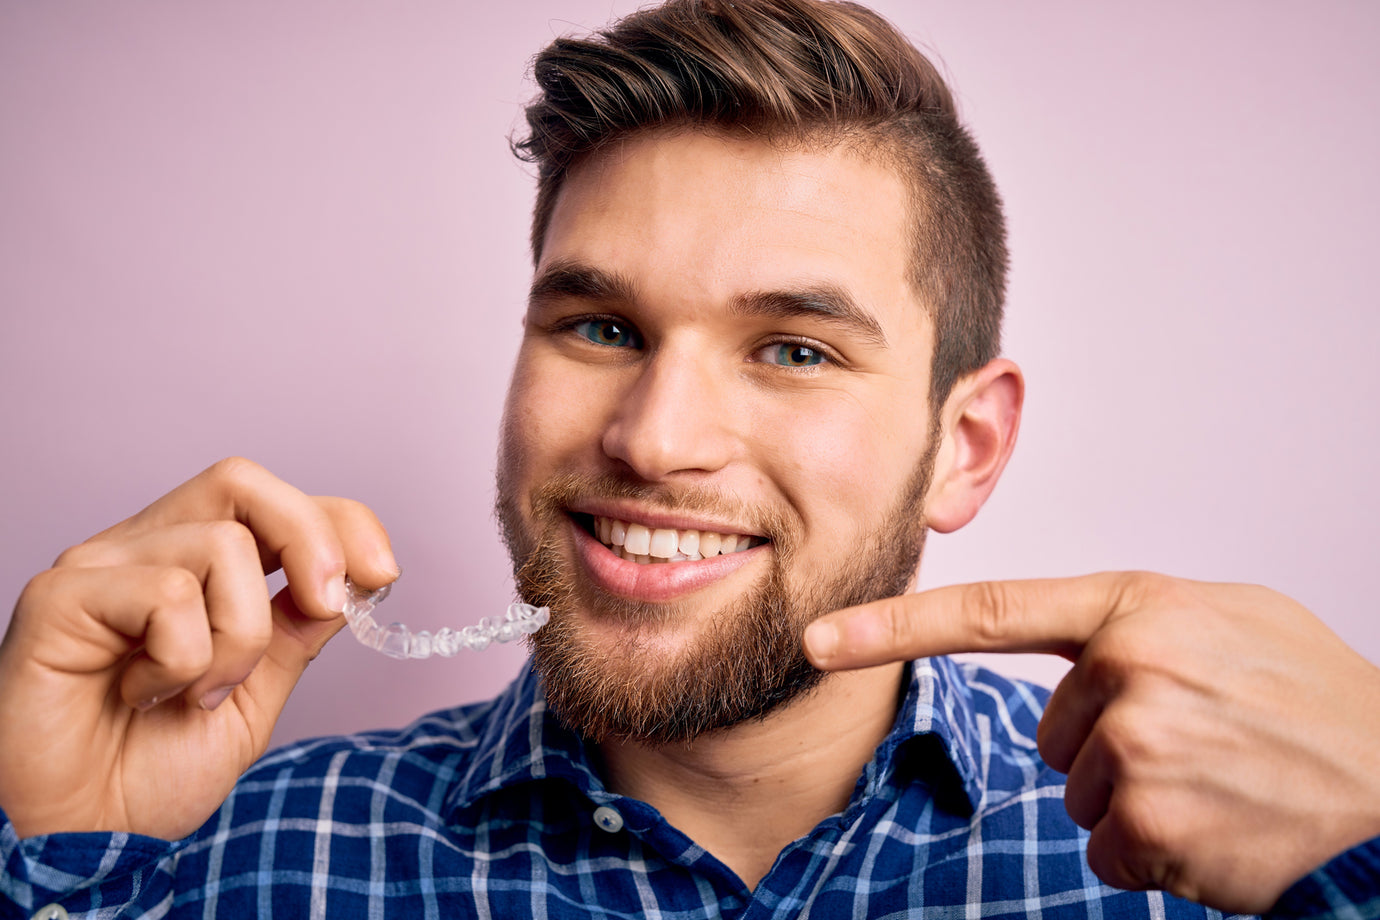 Do Aligners Really Work for Teeth Straightening?